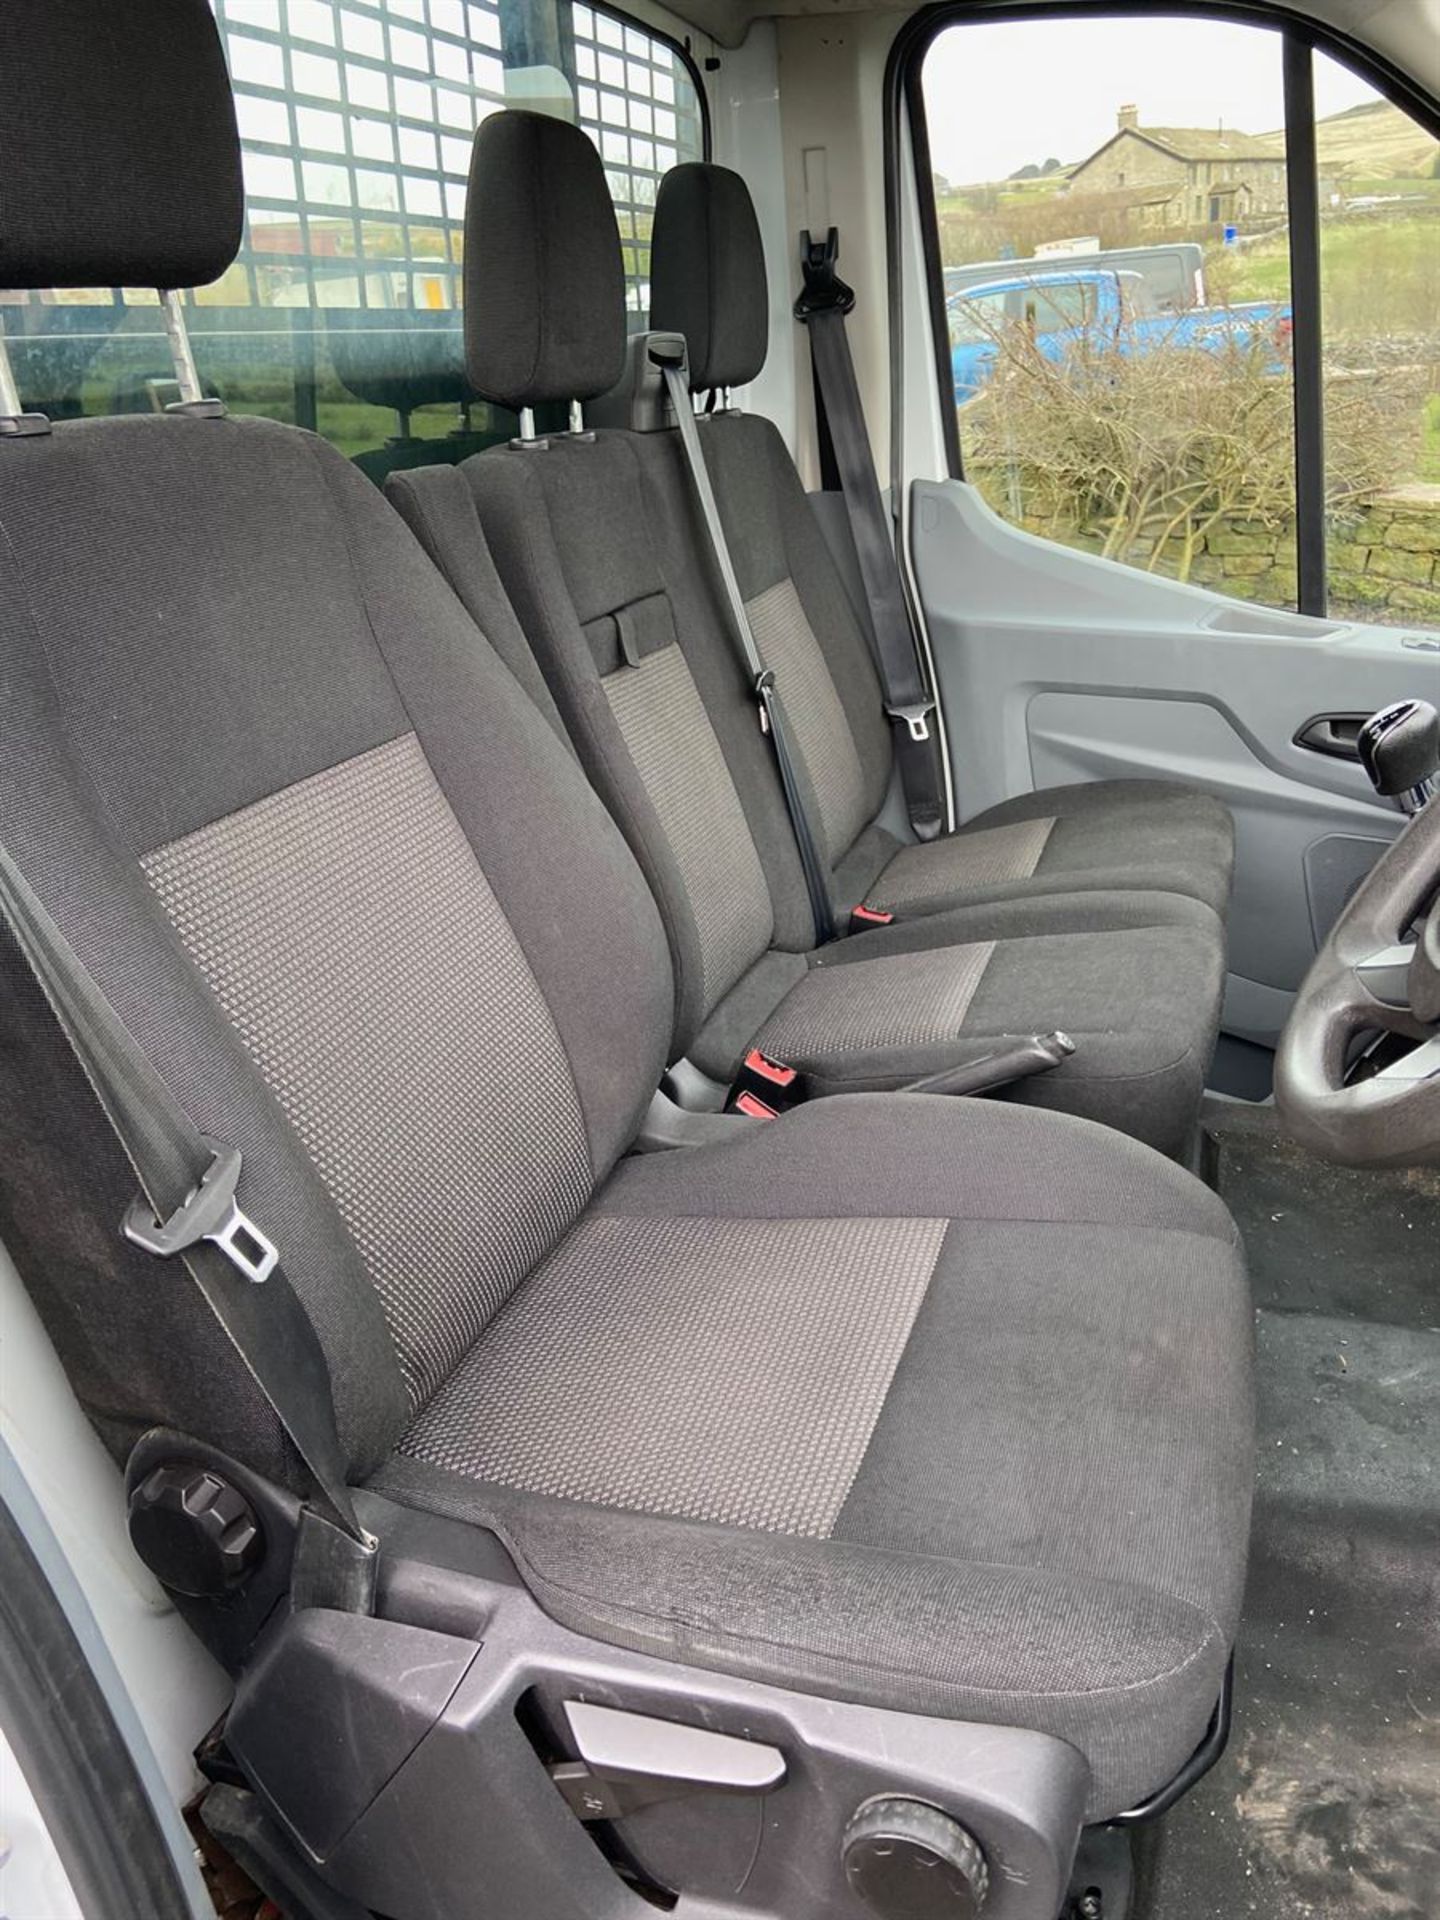 2016/16 FORD TRANSIT 350 PICK-UP L3 DIESEL RWD 2.2 TDCI 125PS CHASSIS CAB (2198 cc) - Image 9 of 11